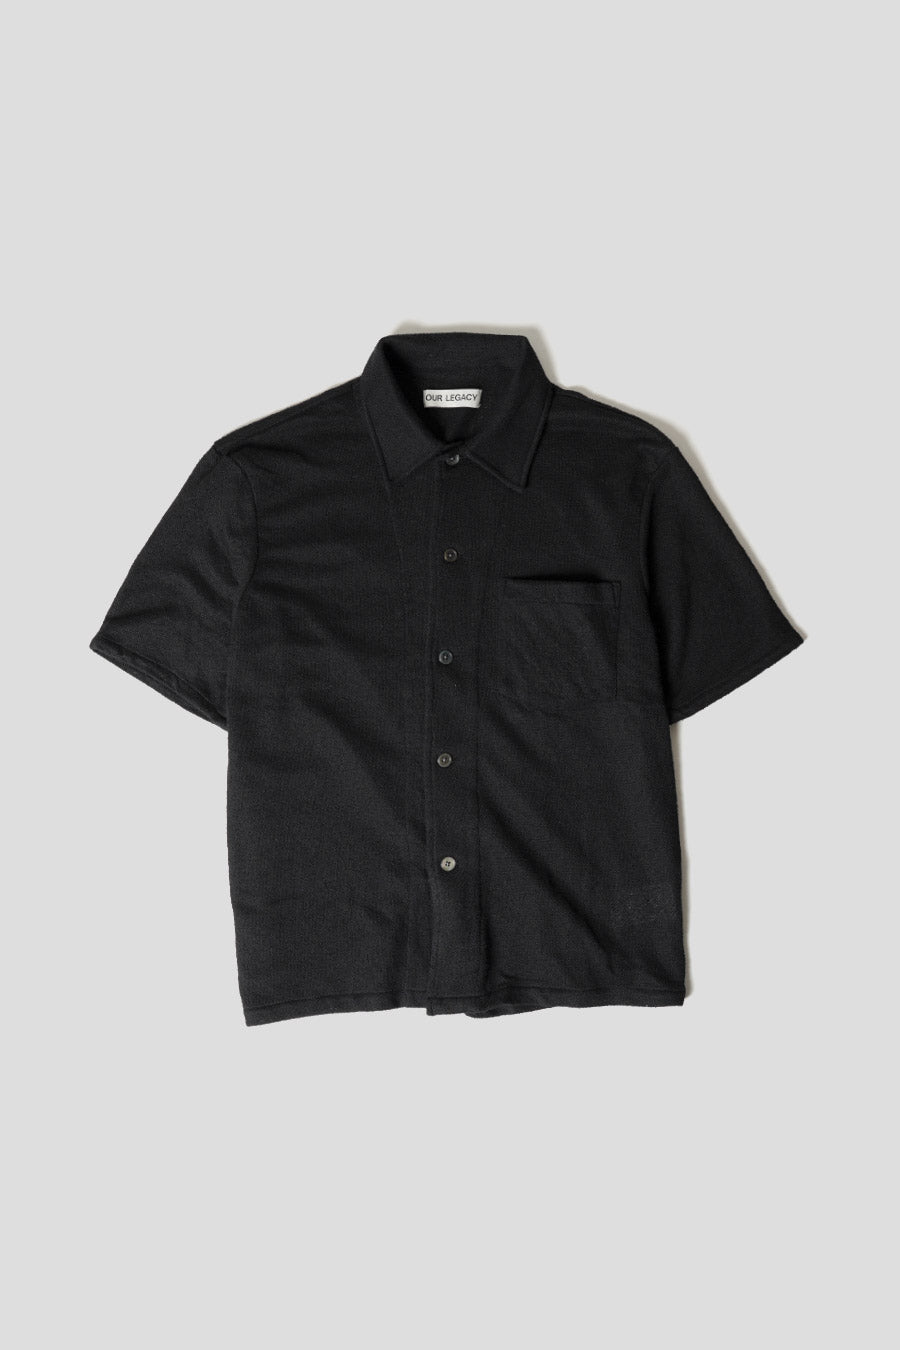 Our Legacy - BLACK SHORT-SLEEVED SHIRT - LE LABO STORE